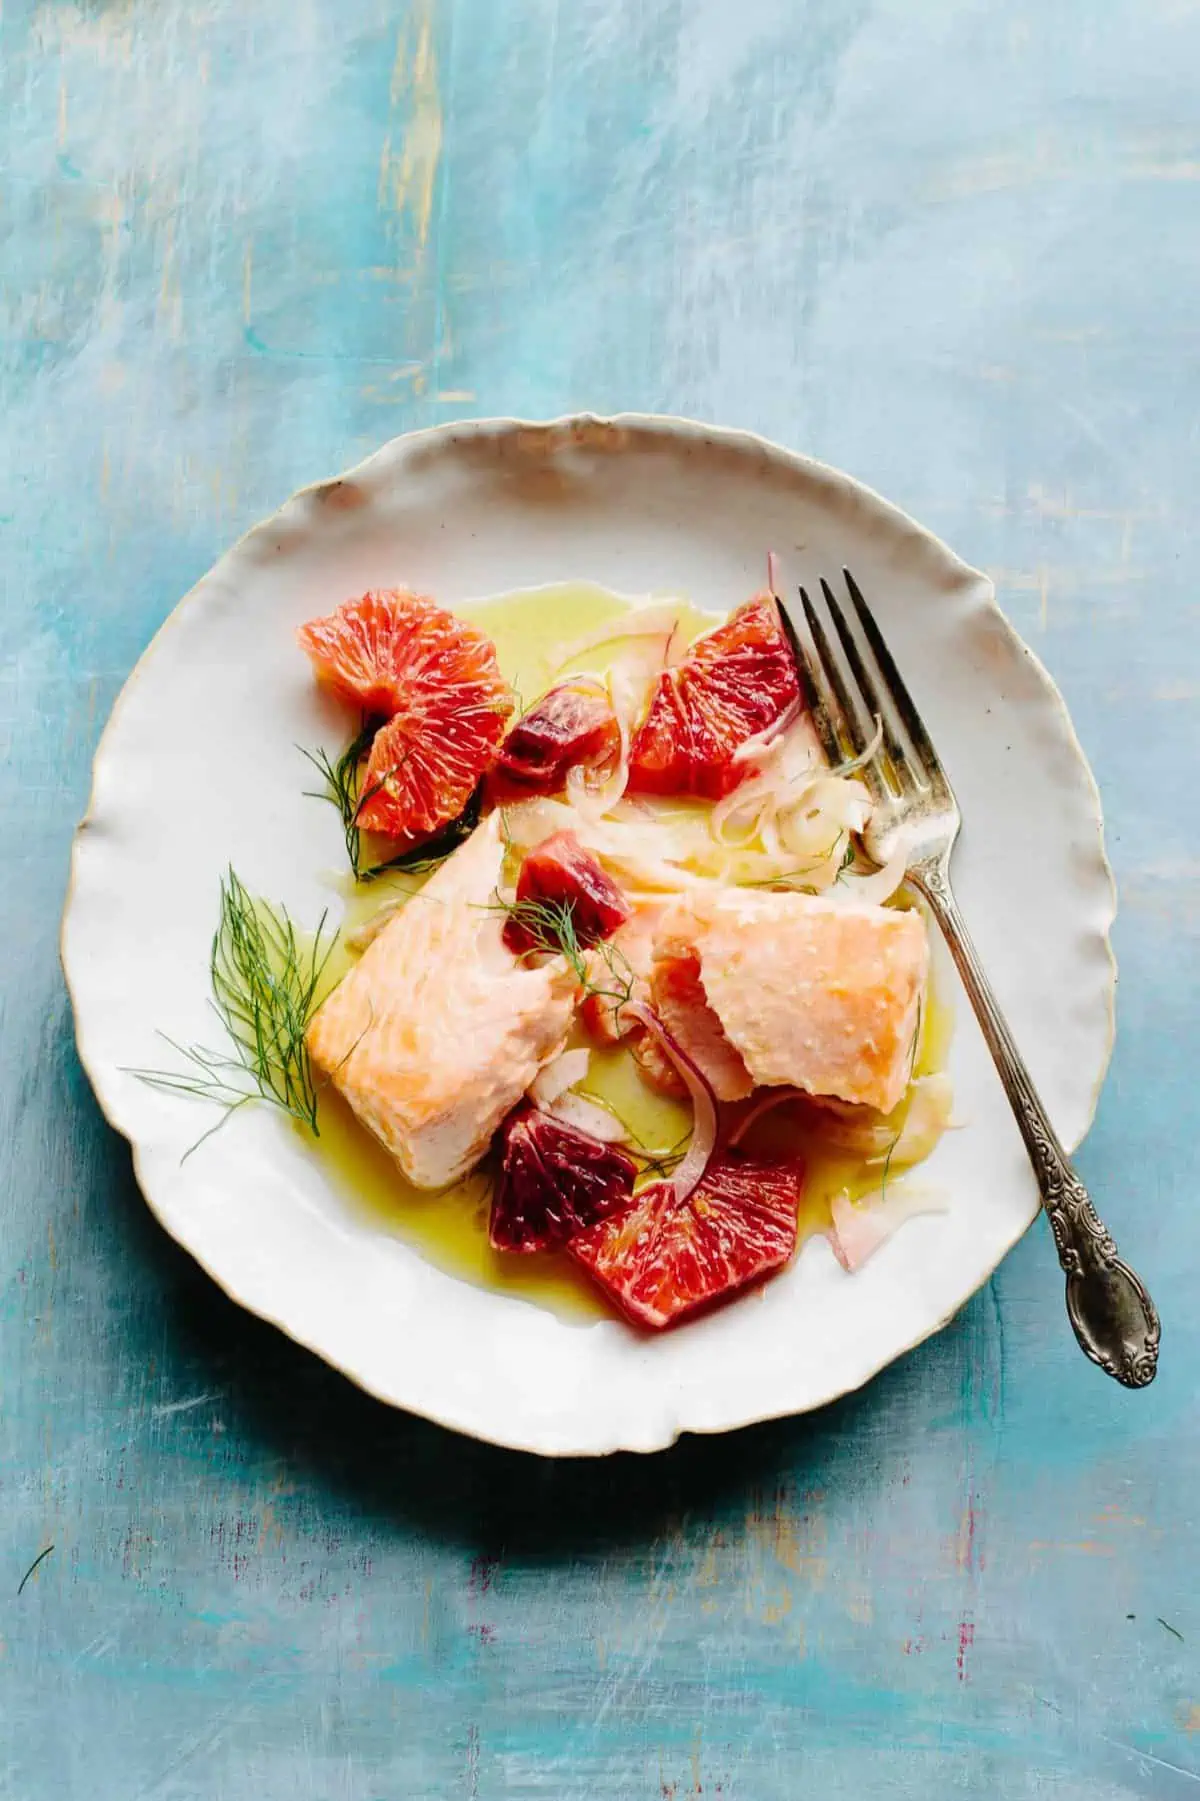 Top view of a white dinner plate with a fork, flaked salmon fillet, and sliced citrus.